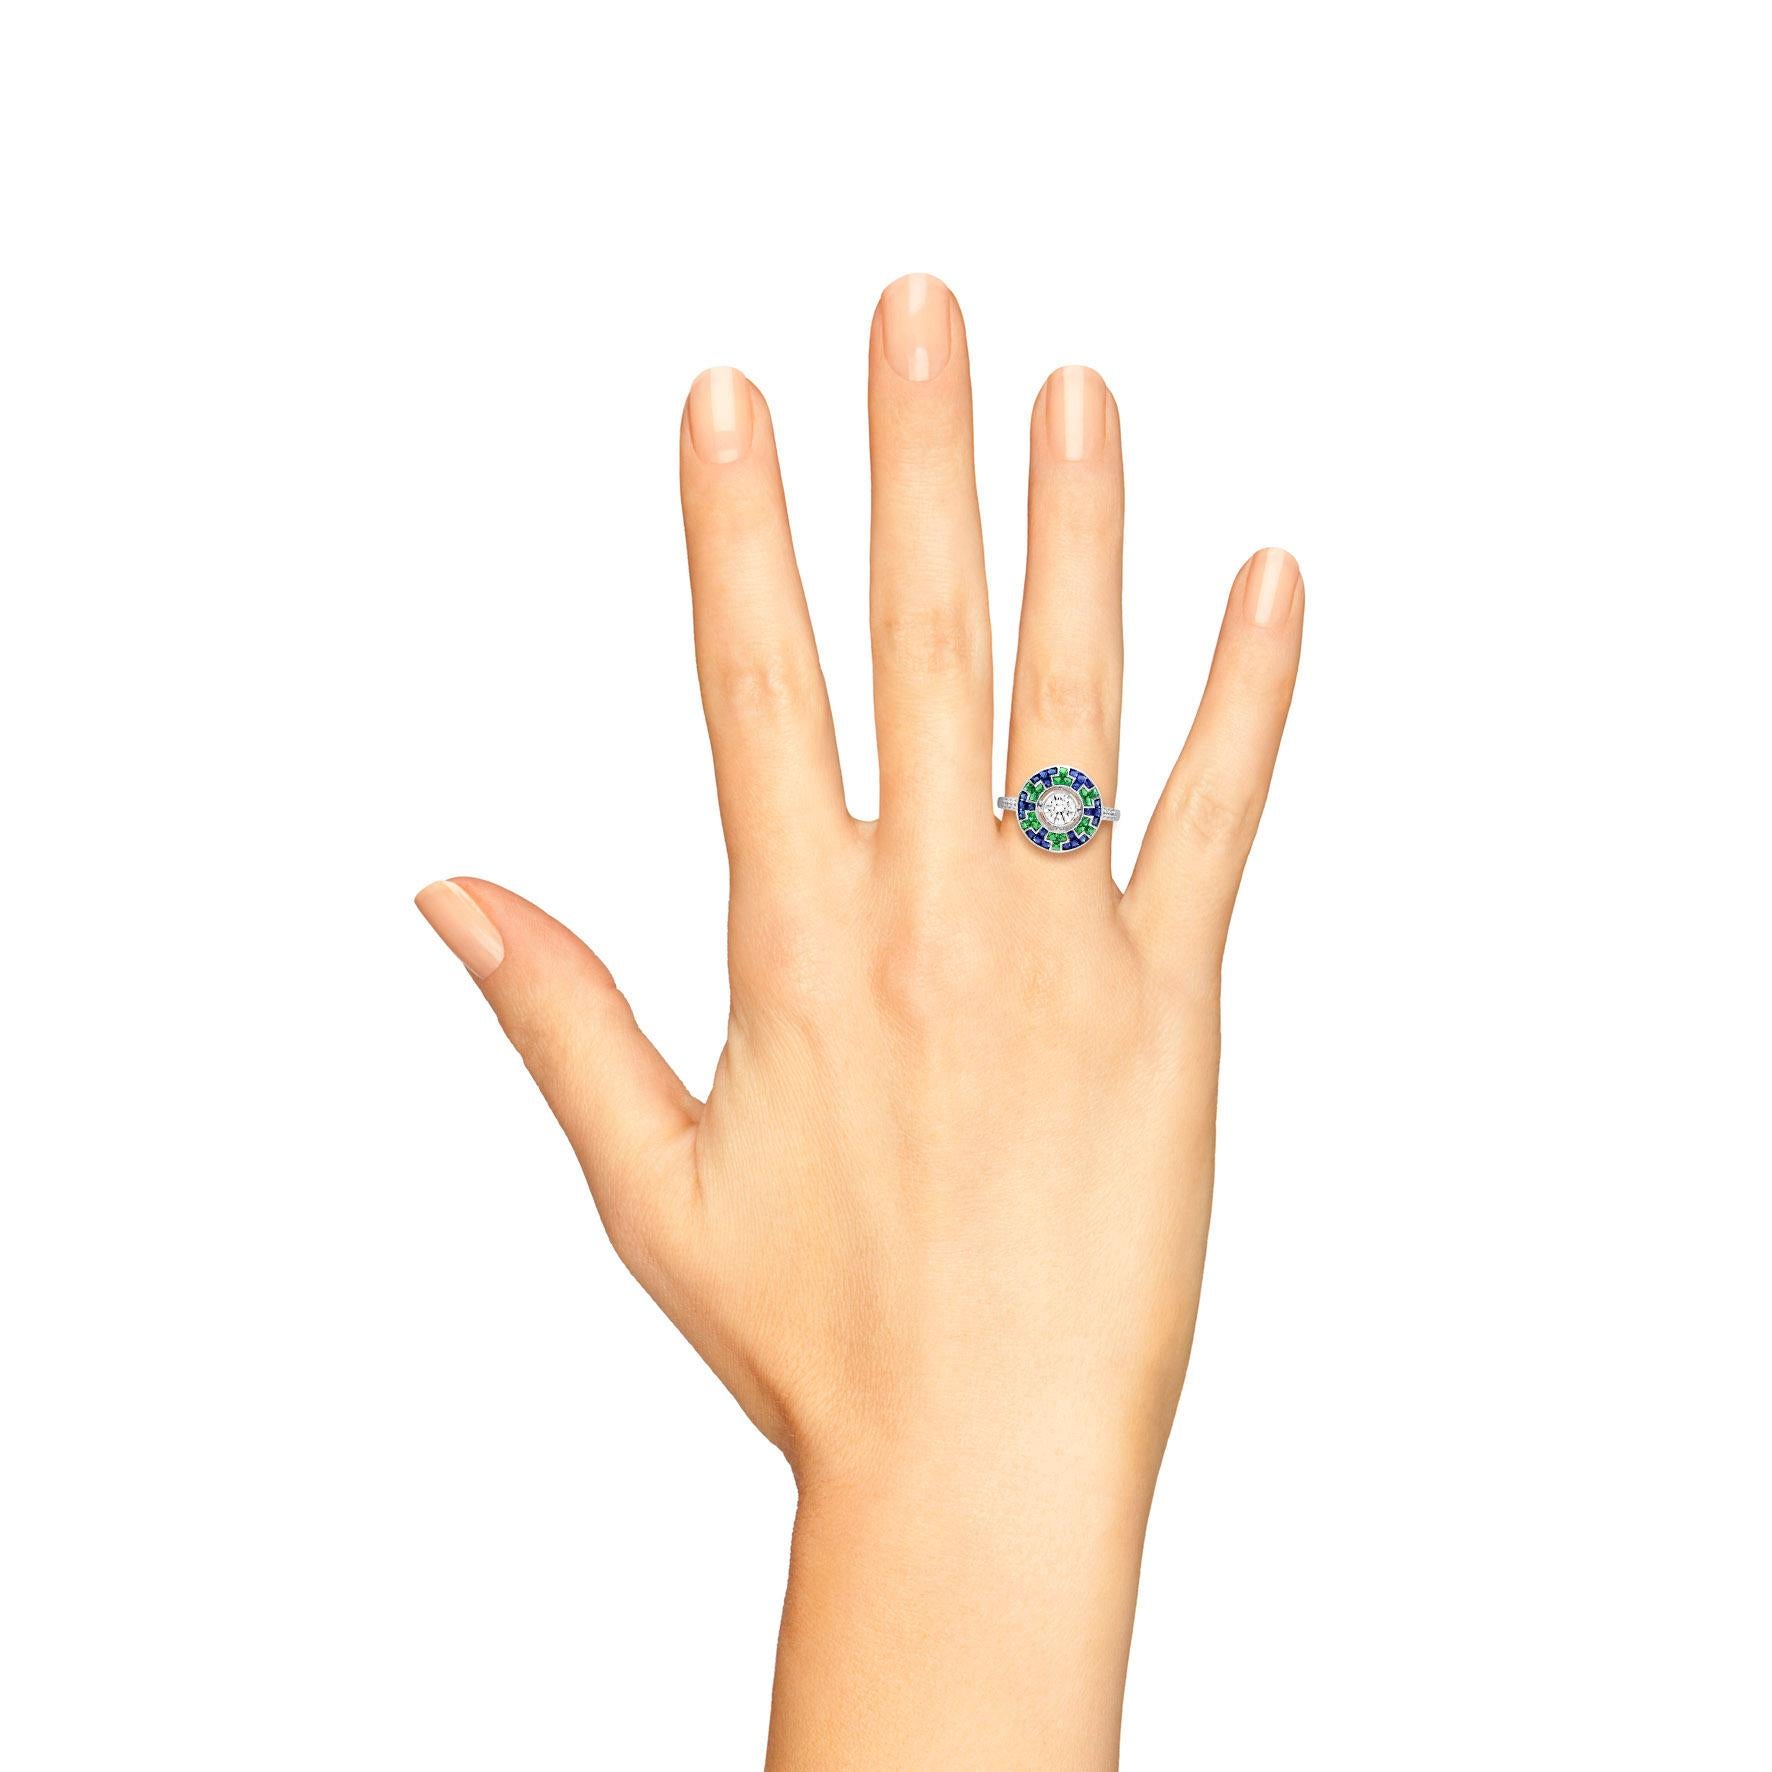 A chic diamond with blue sapphire and emerald target ring. The central round diamond is securely milgrain set into white gold as the centerpiece of this stunning ring. Designed to resemble a stylish geometric wheel, French cut blue sapphires and